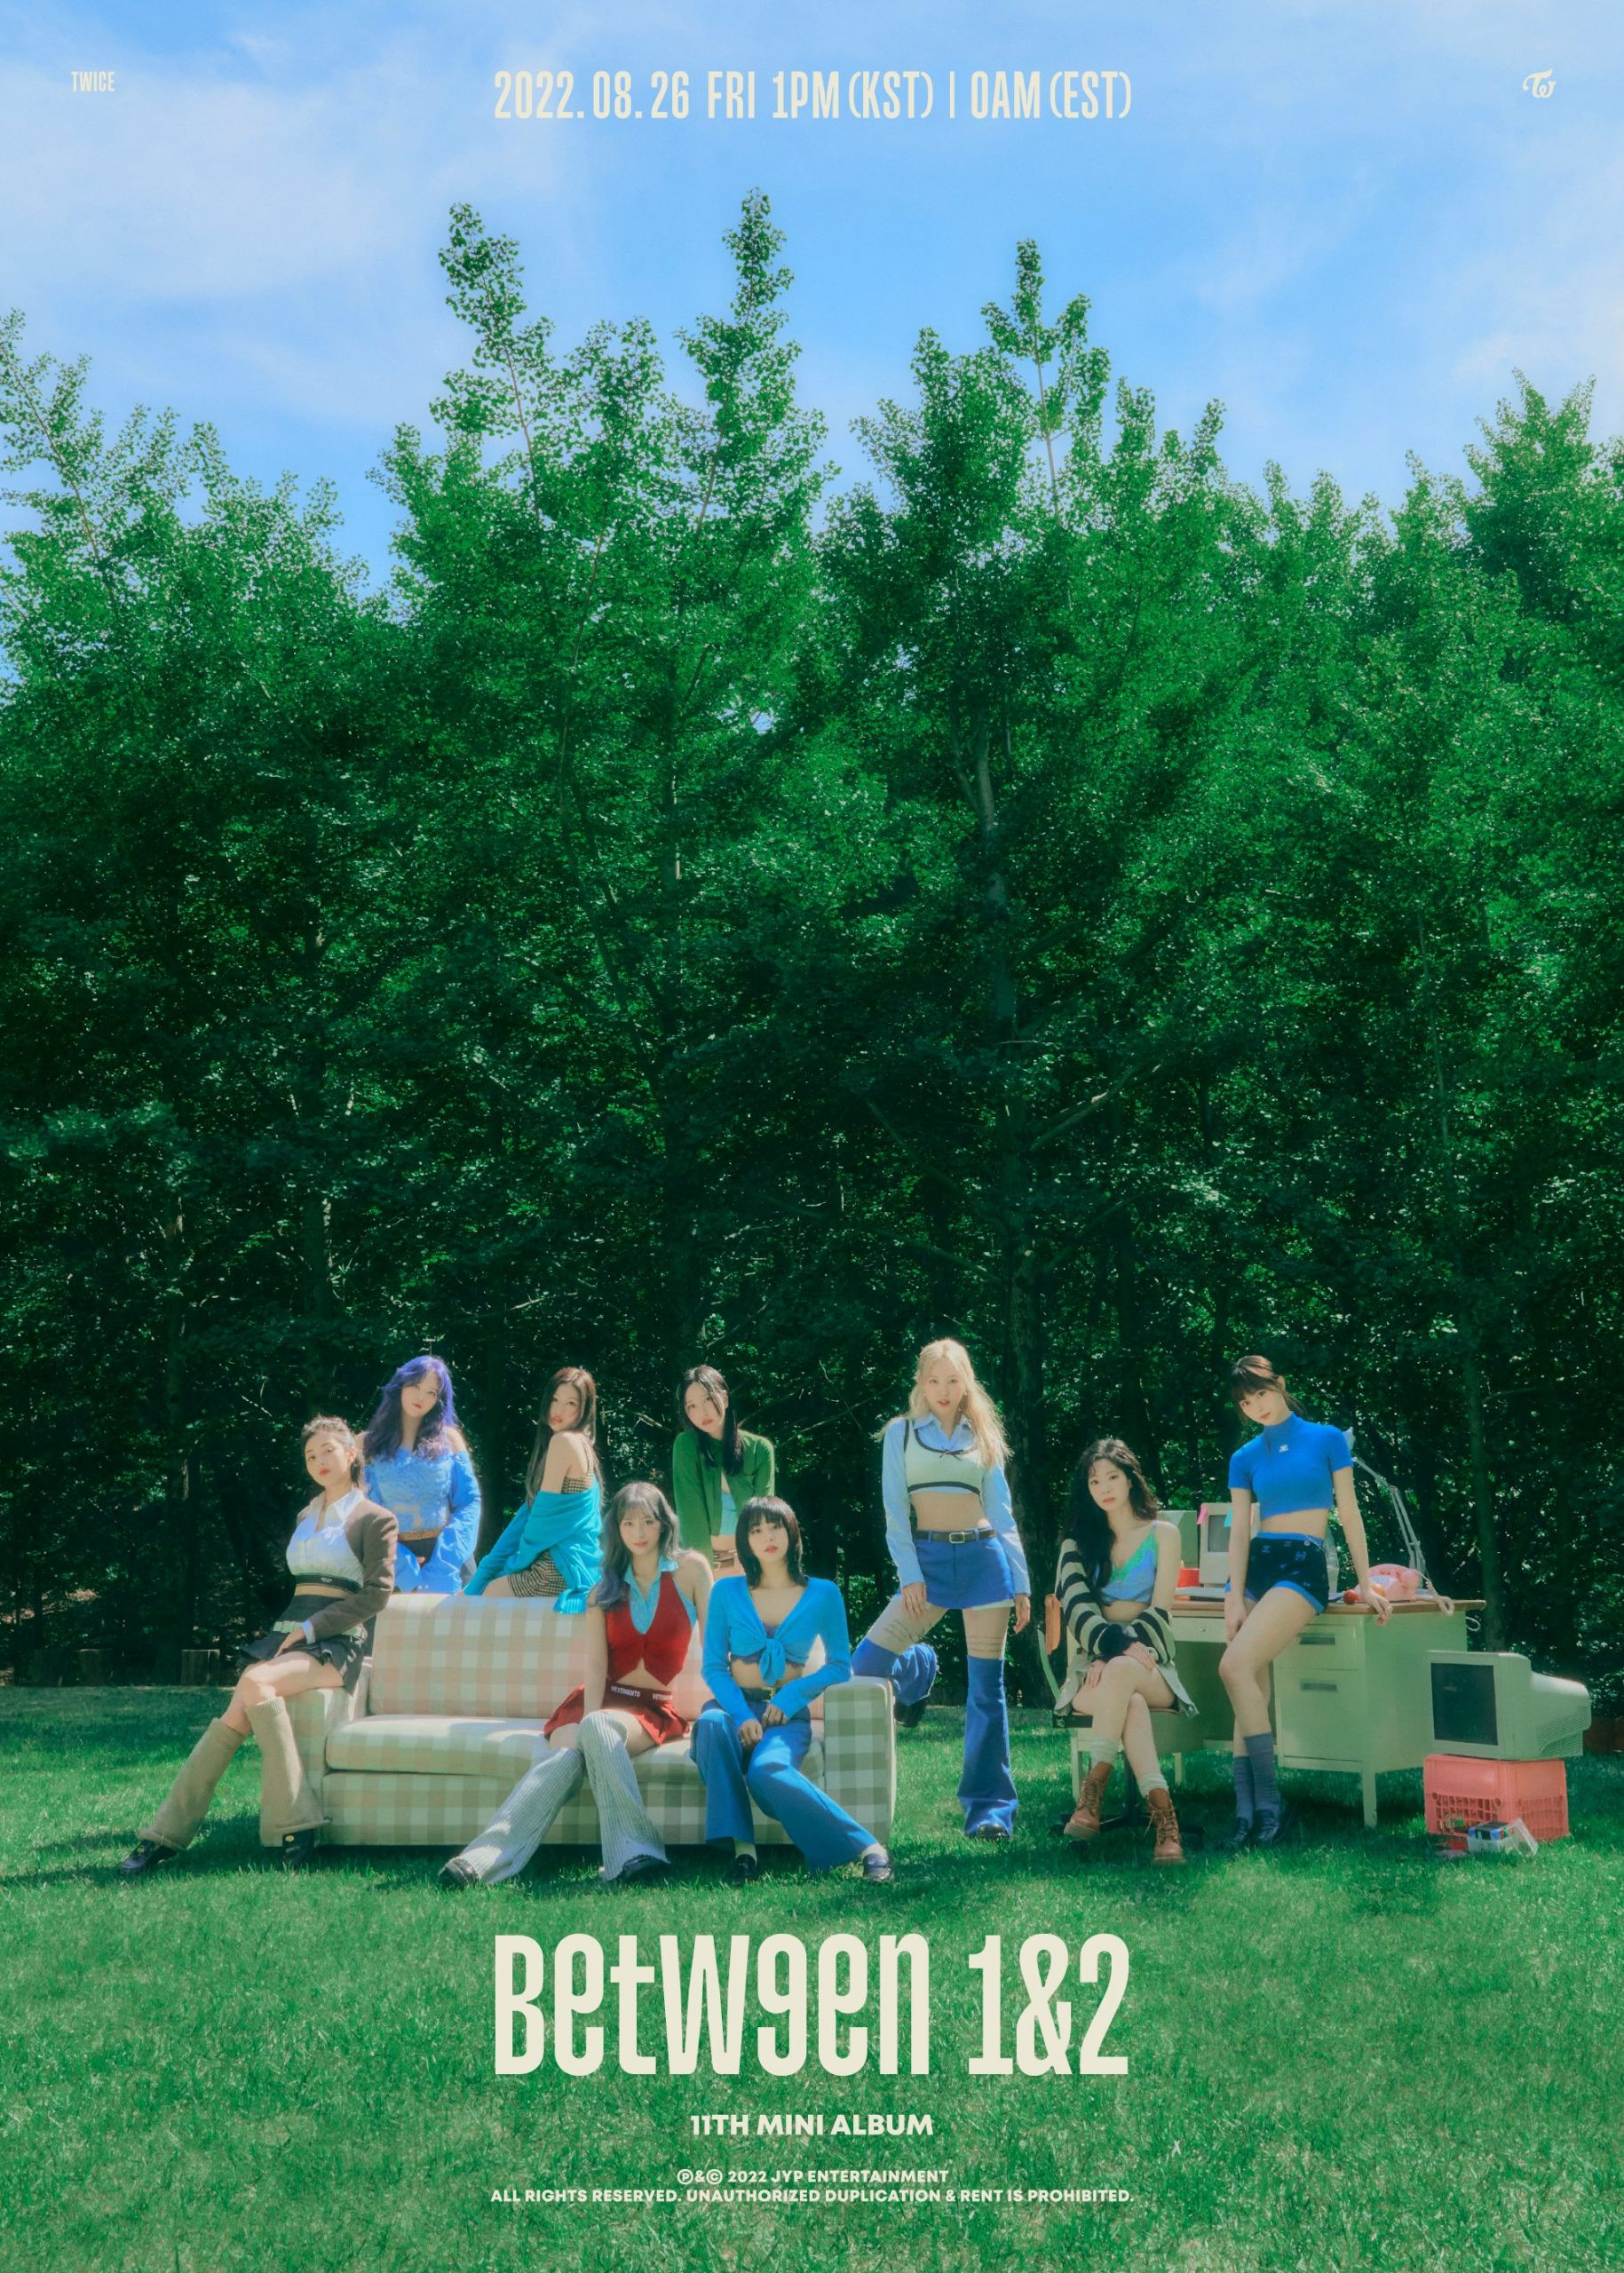 Update: TWICE Asks You To “Talk That Talk” In New MV Teaser For Comeback  Track | Soompi